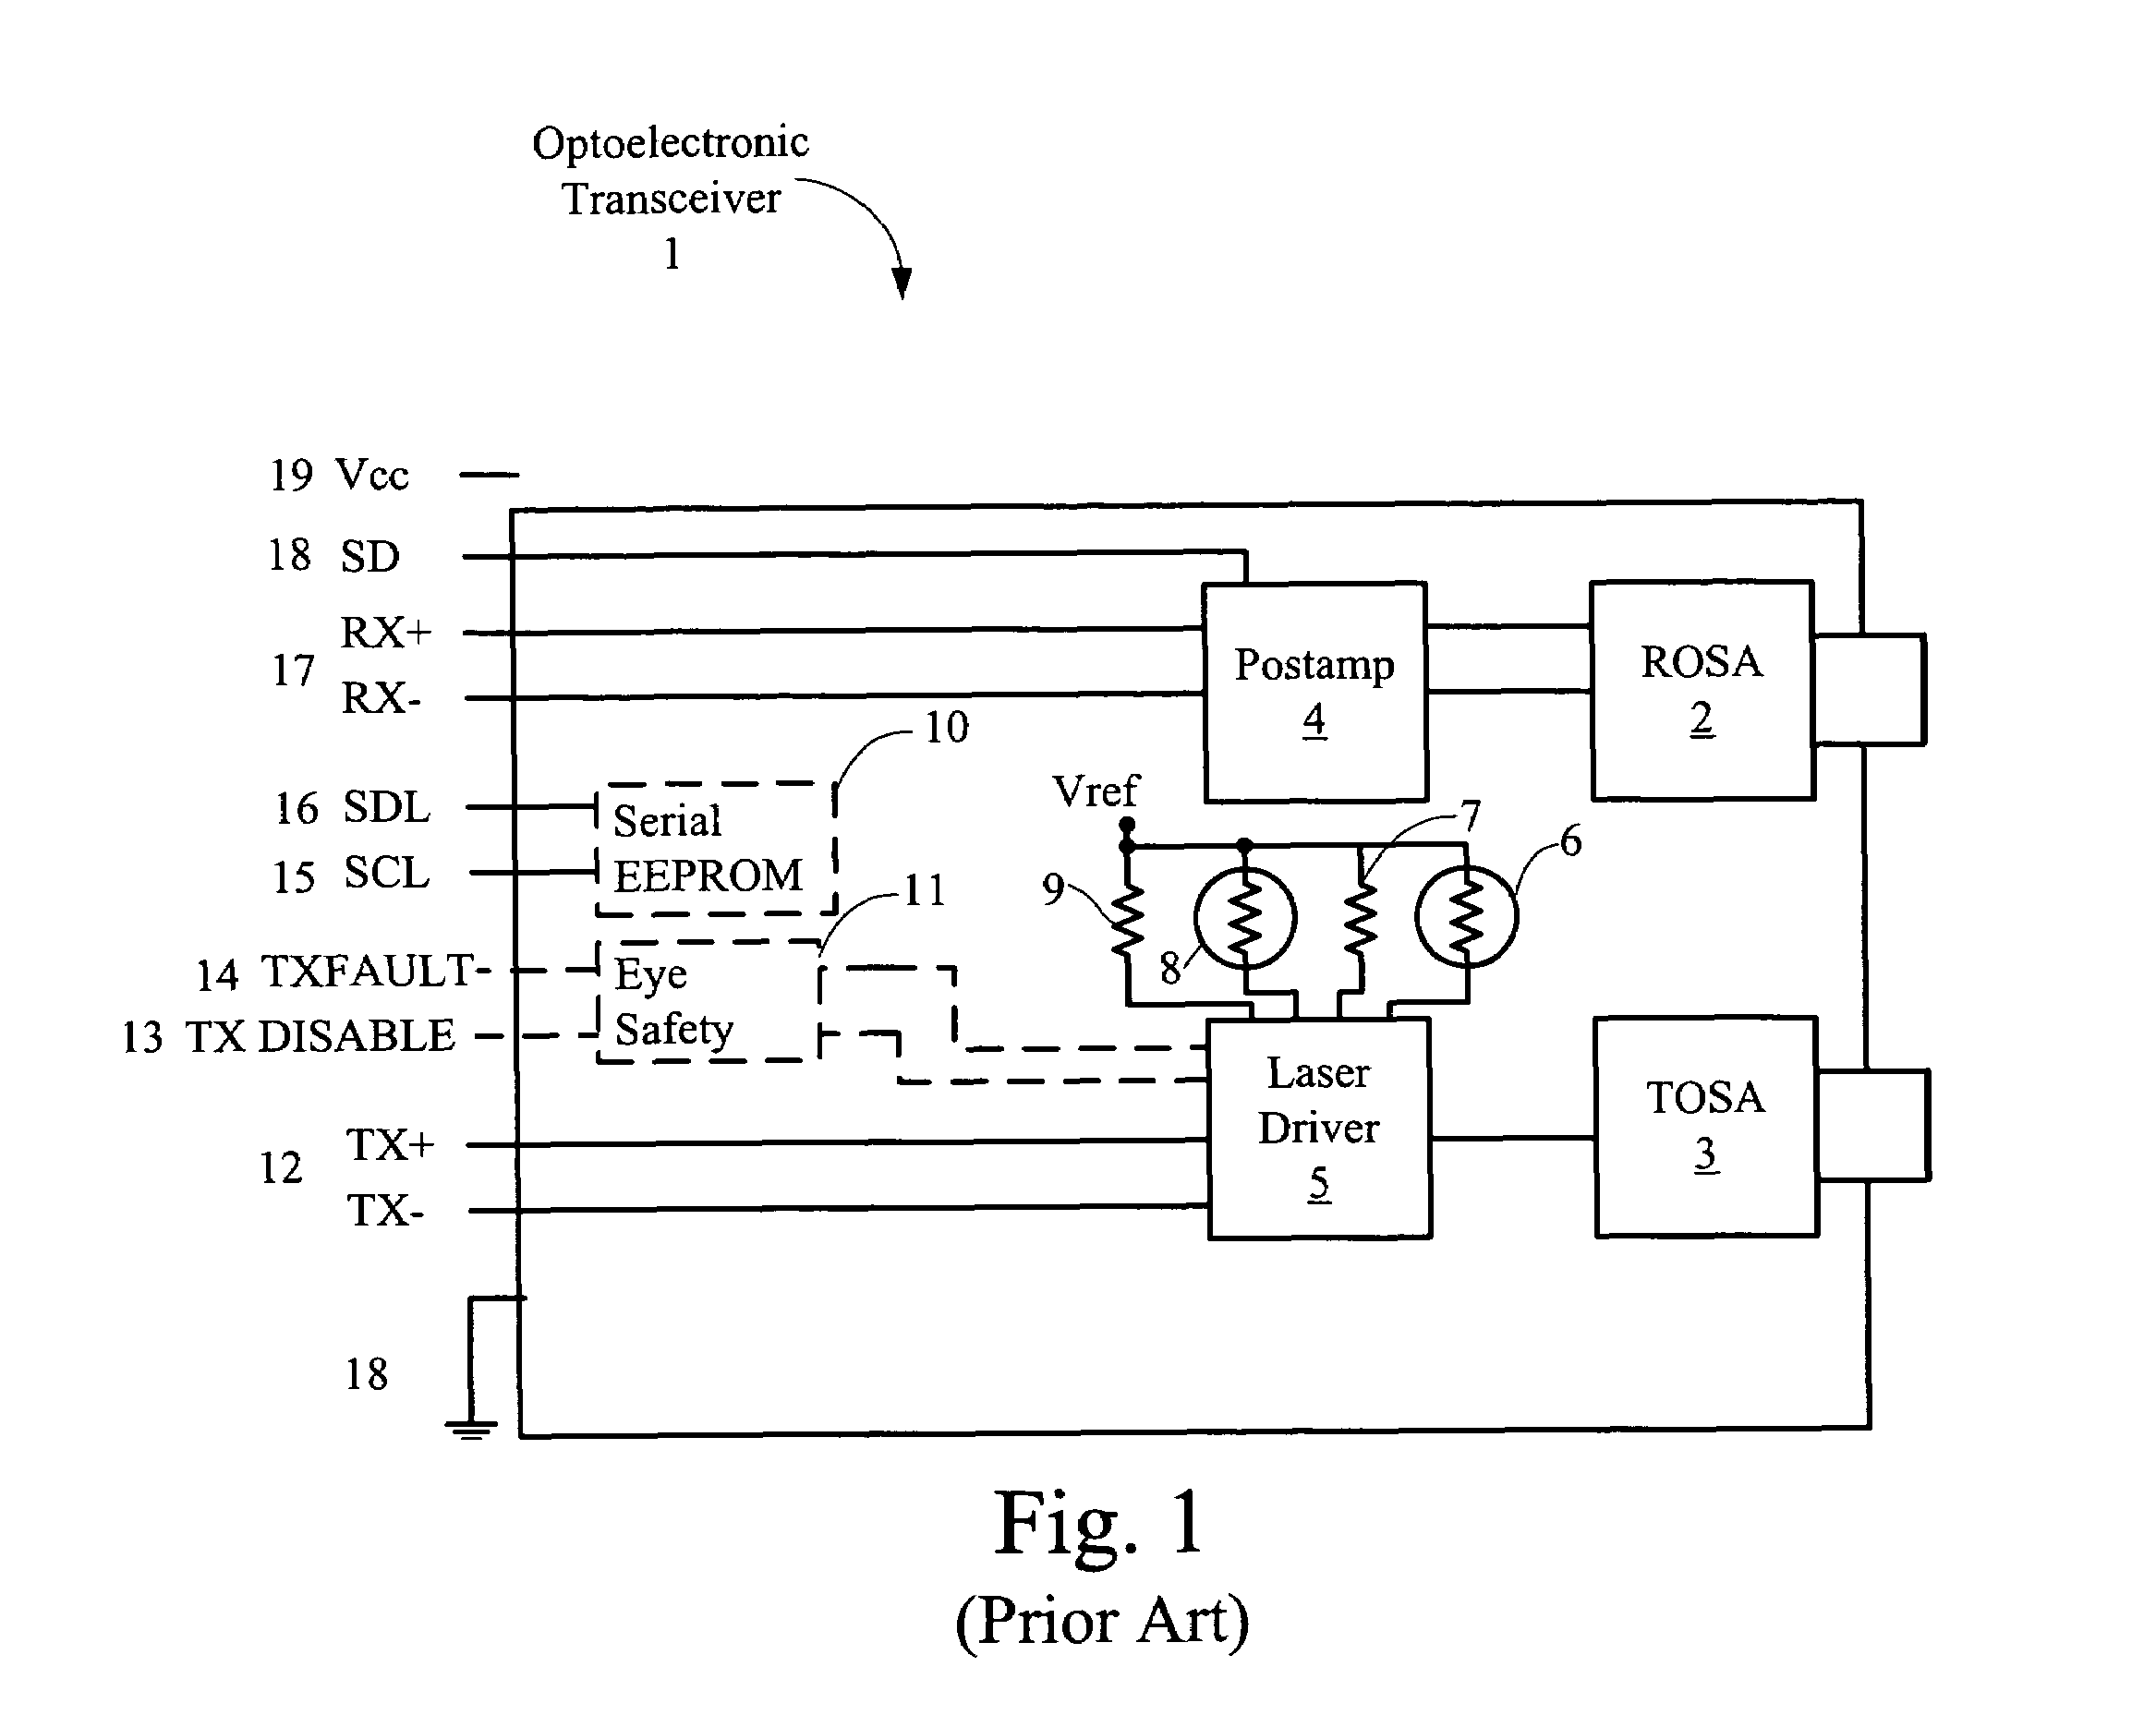 Optical transceiver and host adapter with memory mapped monitoring circuitry